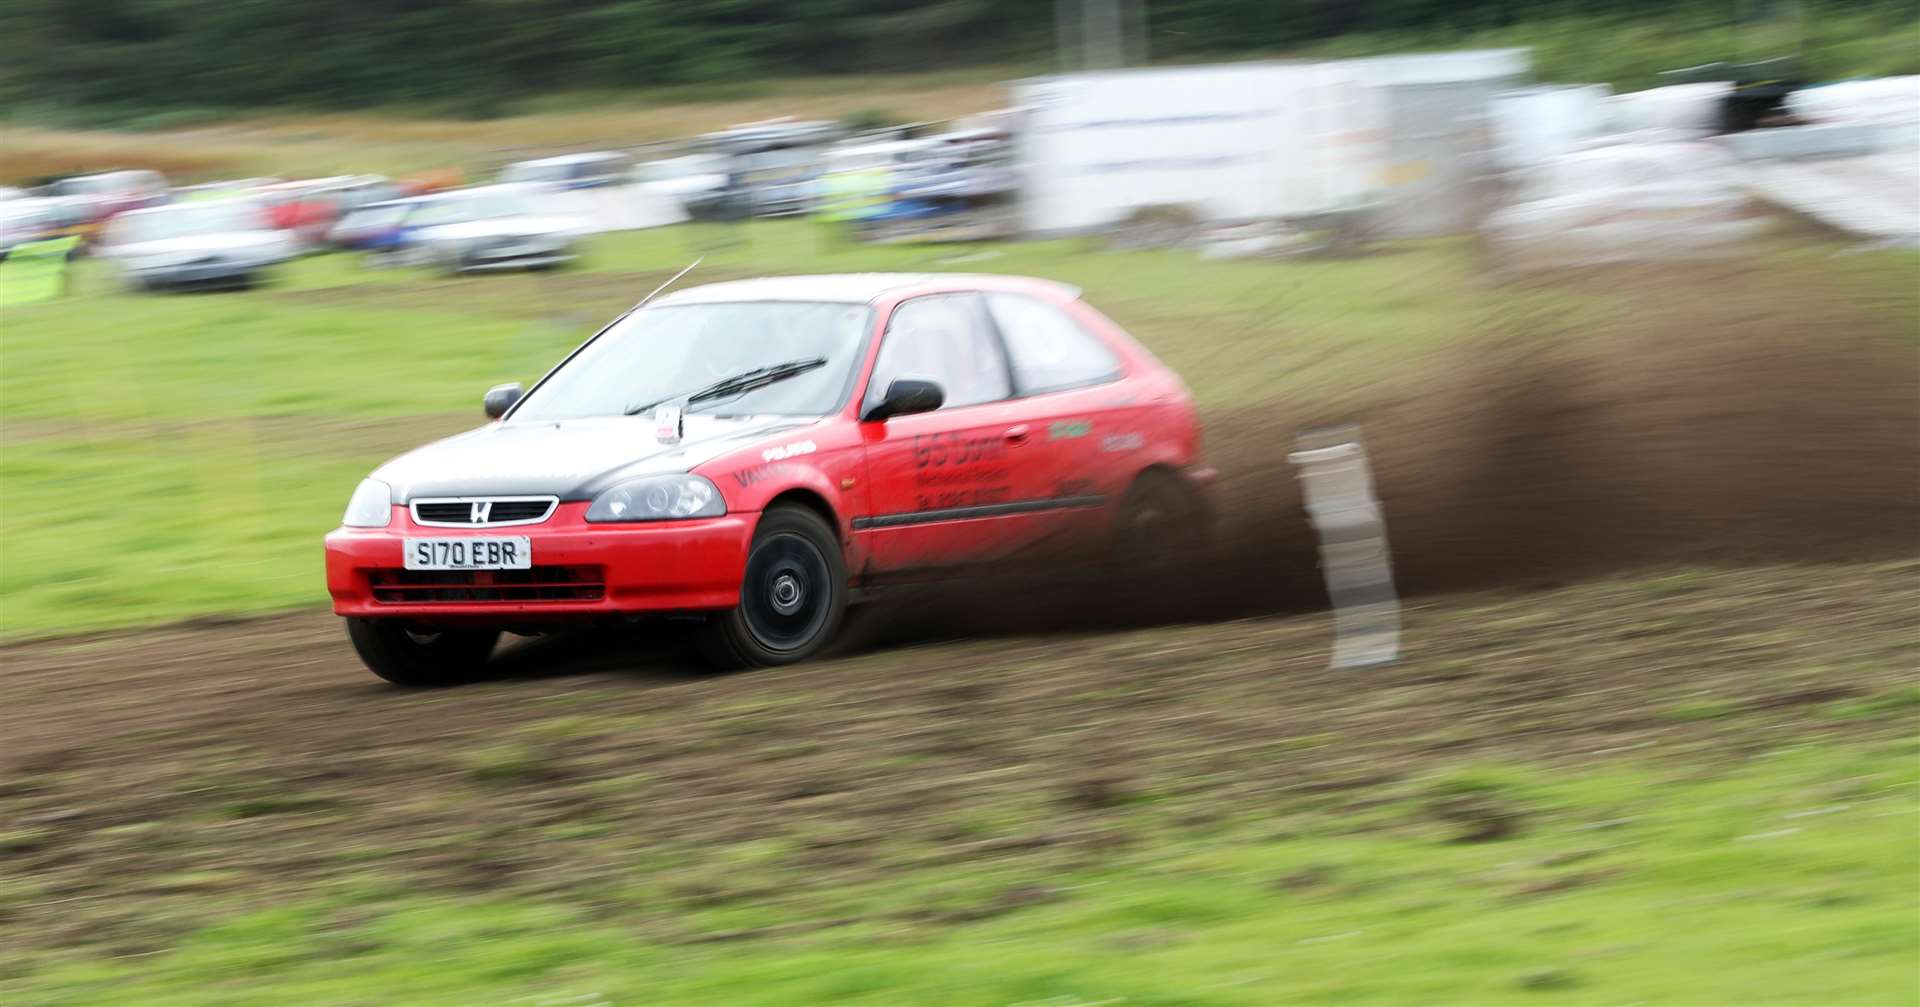 Gordie Donn in his Honda Civic kicks out the dirt on his way to winning his class and third fastest time of the day. Picture: James Gunn